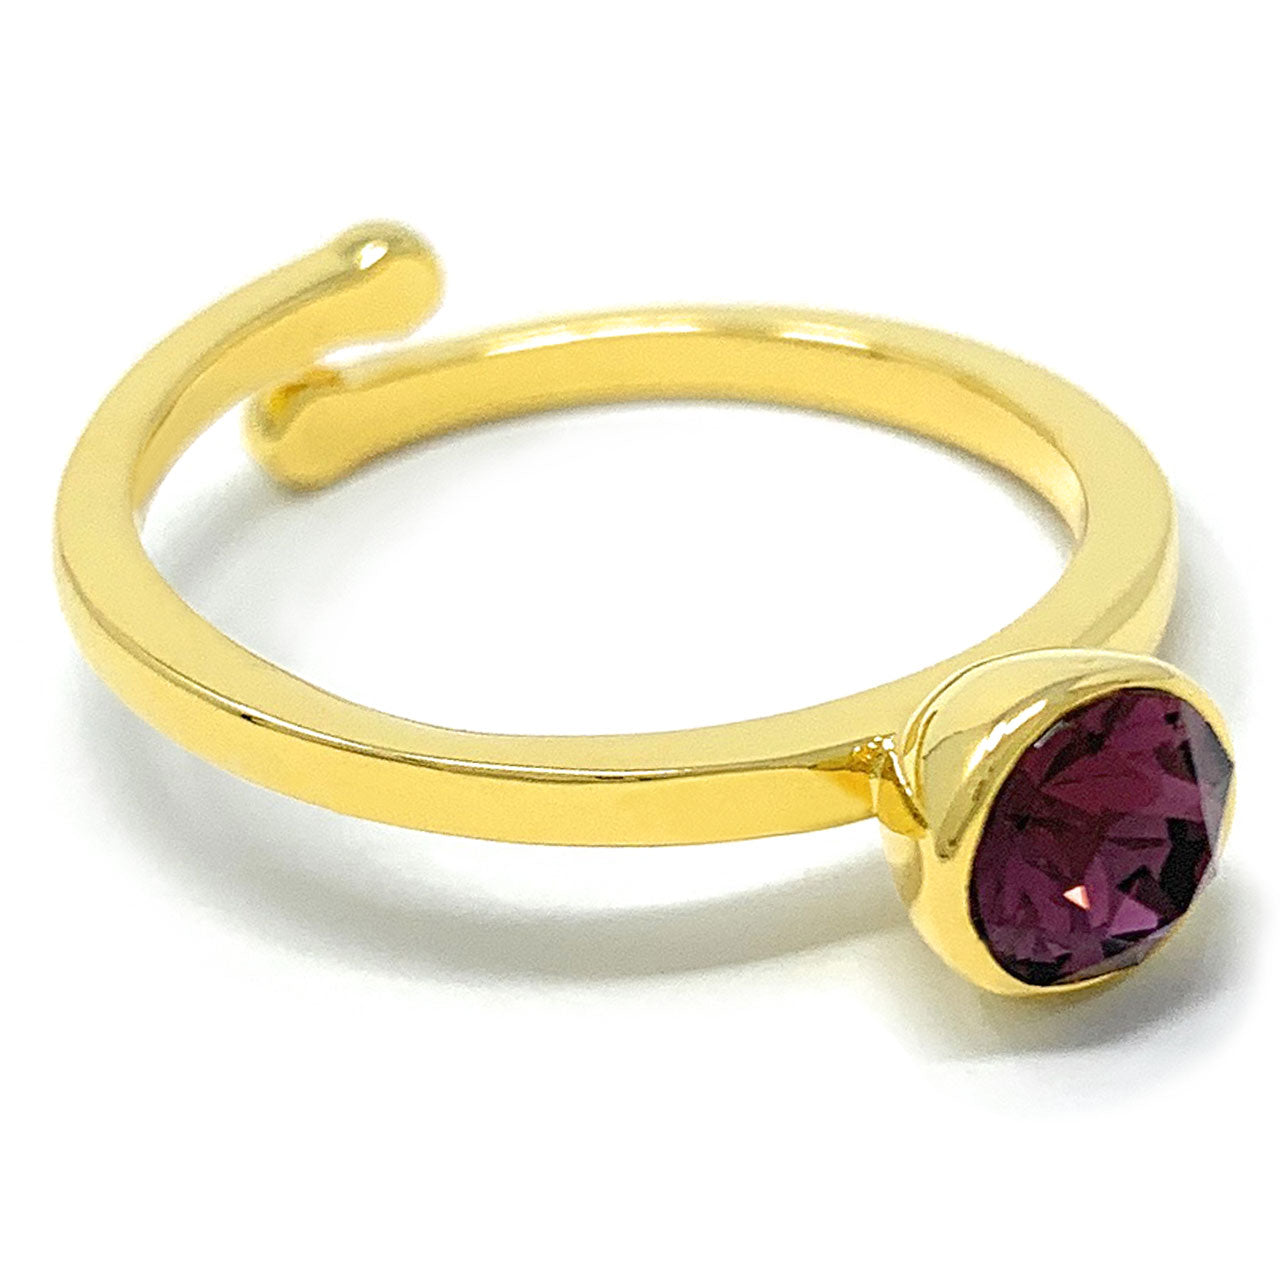 Harley Adjustable Ring with Purple Amethyst Round Crystals from Swarovski Gold Plated - Ed Heart